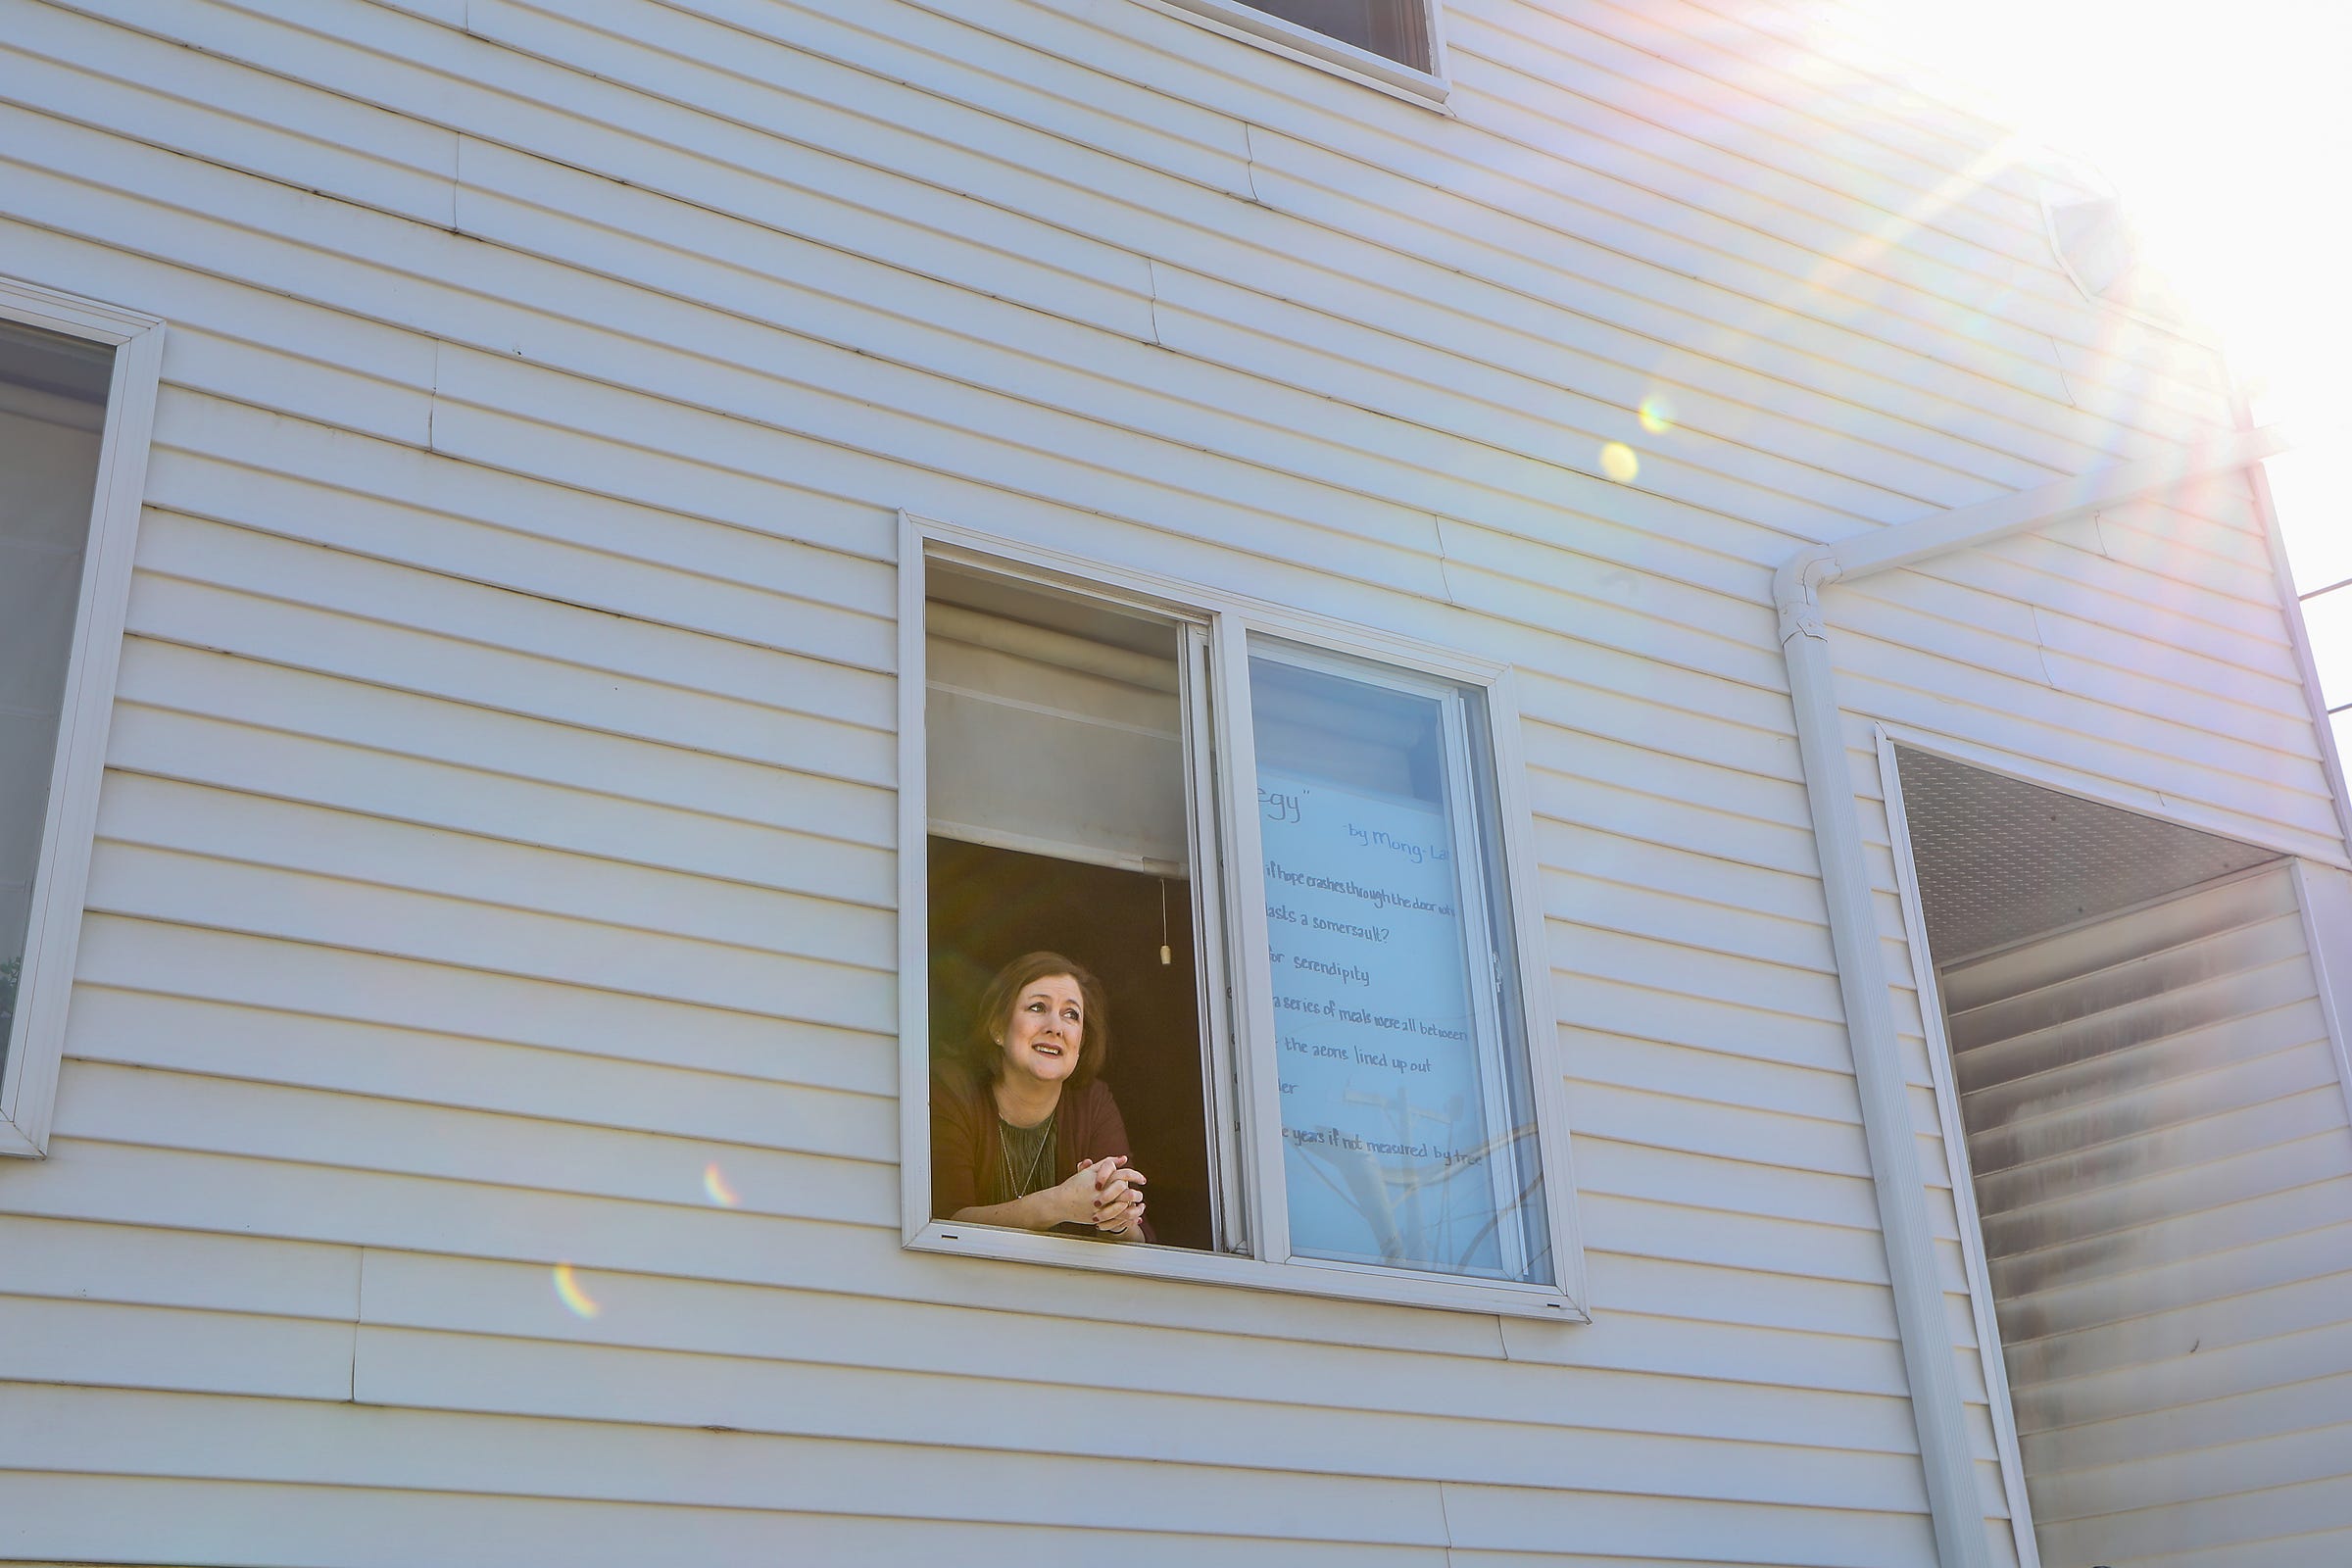 Every day, Mickey Lyons, 46, of Hamtramck writes a poem in the window of her home to celebrate National Poetry Month. “There have been other times when the world went through a tough period,” says Lyons. “We’re not alone even though we may be isolated.”